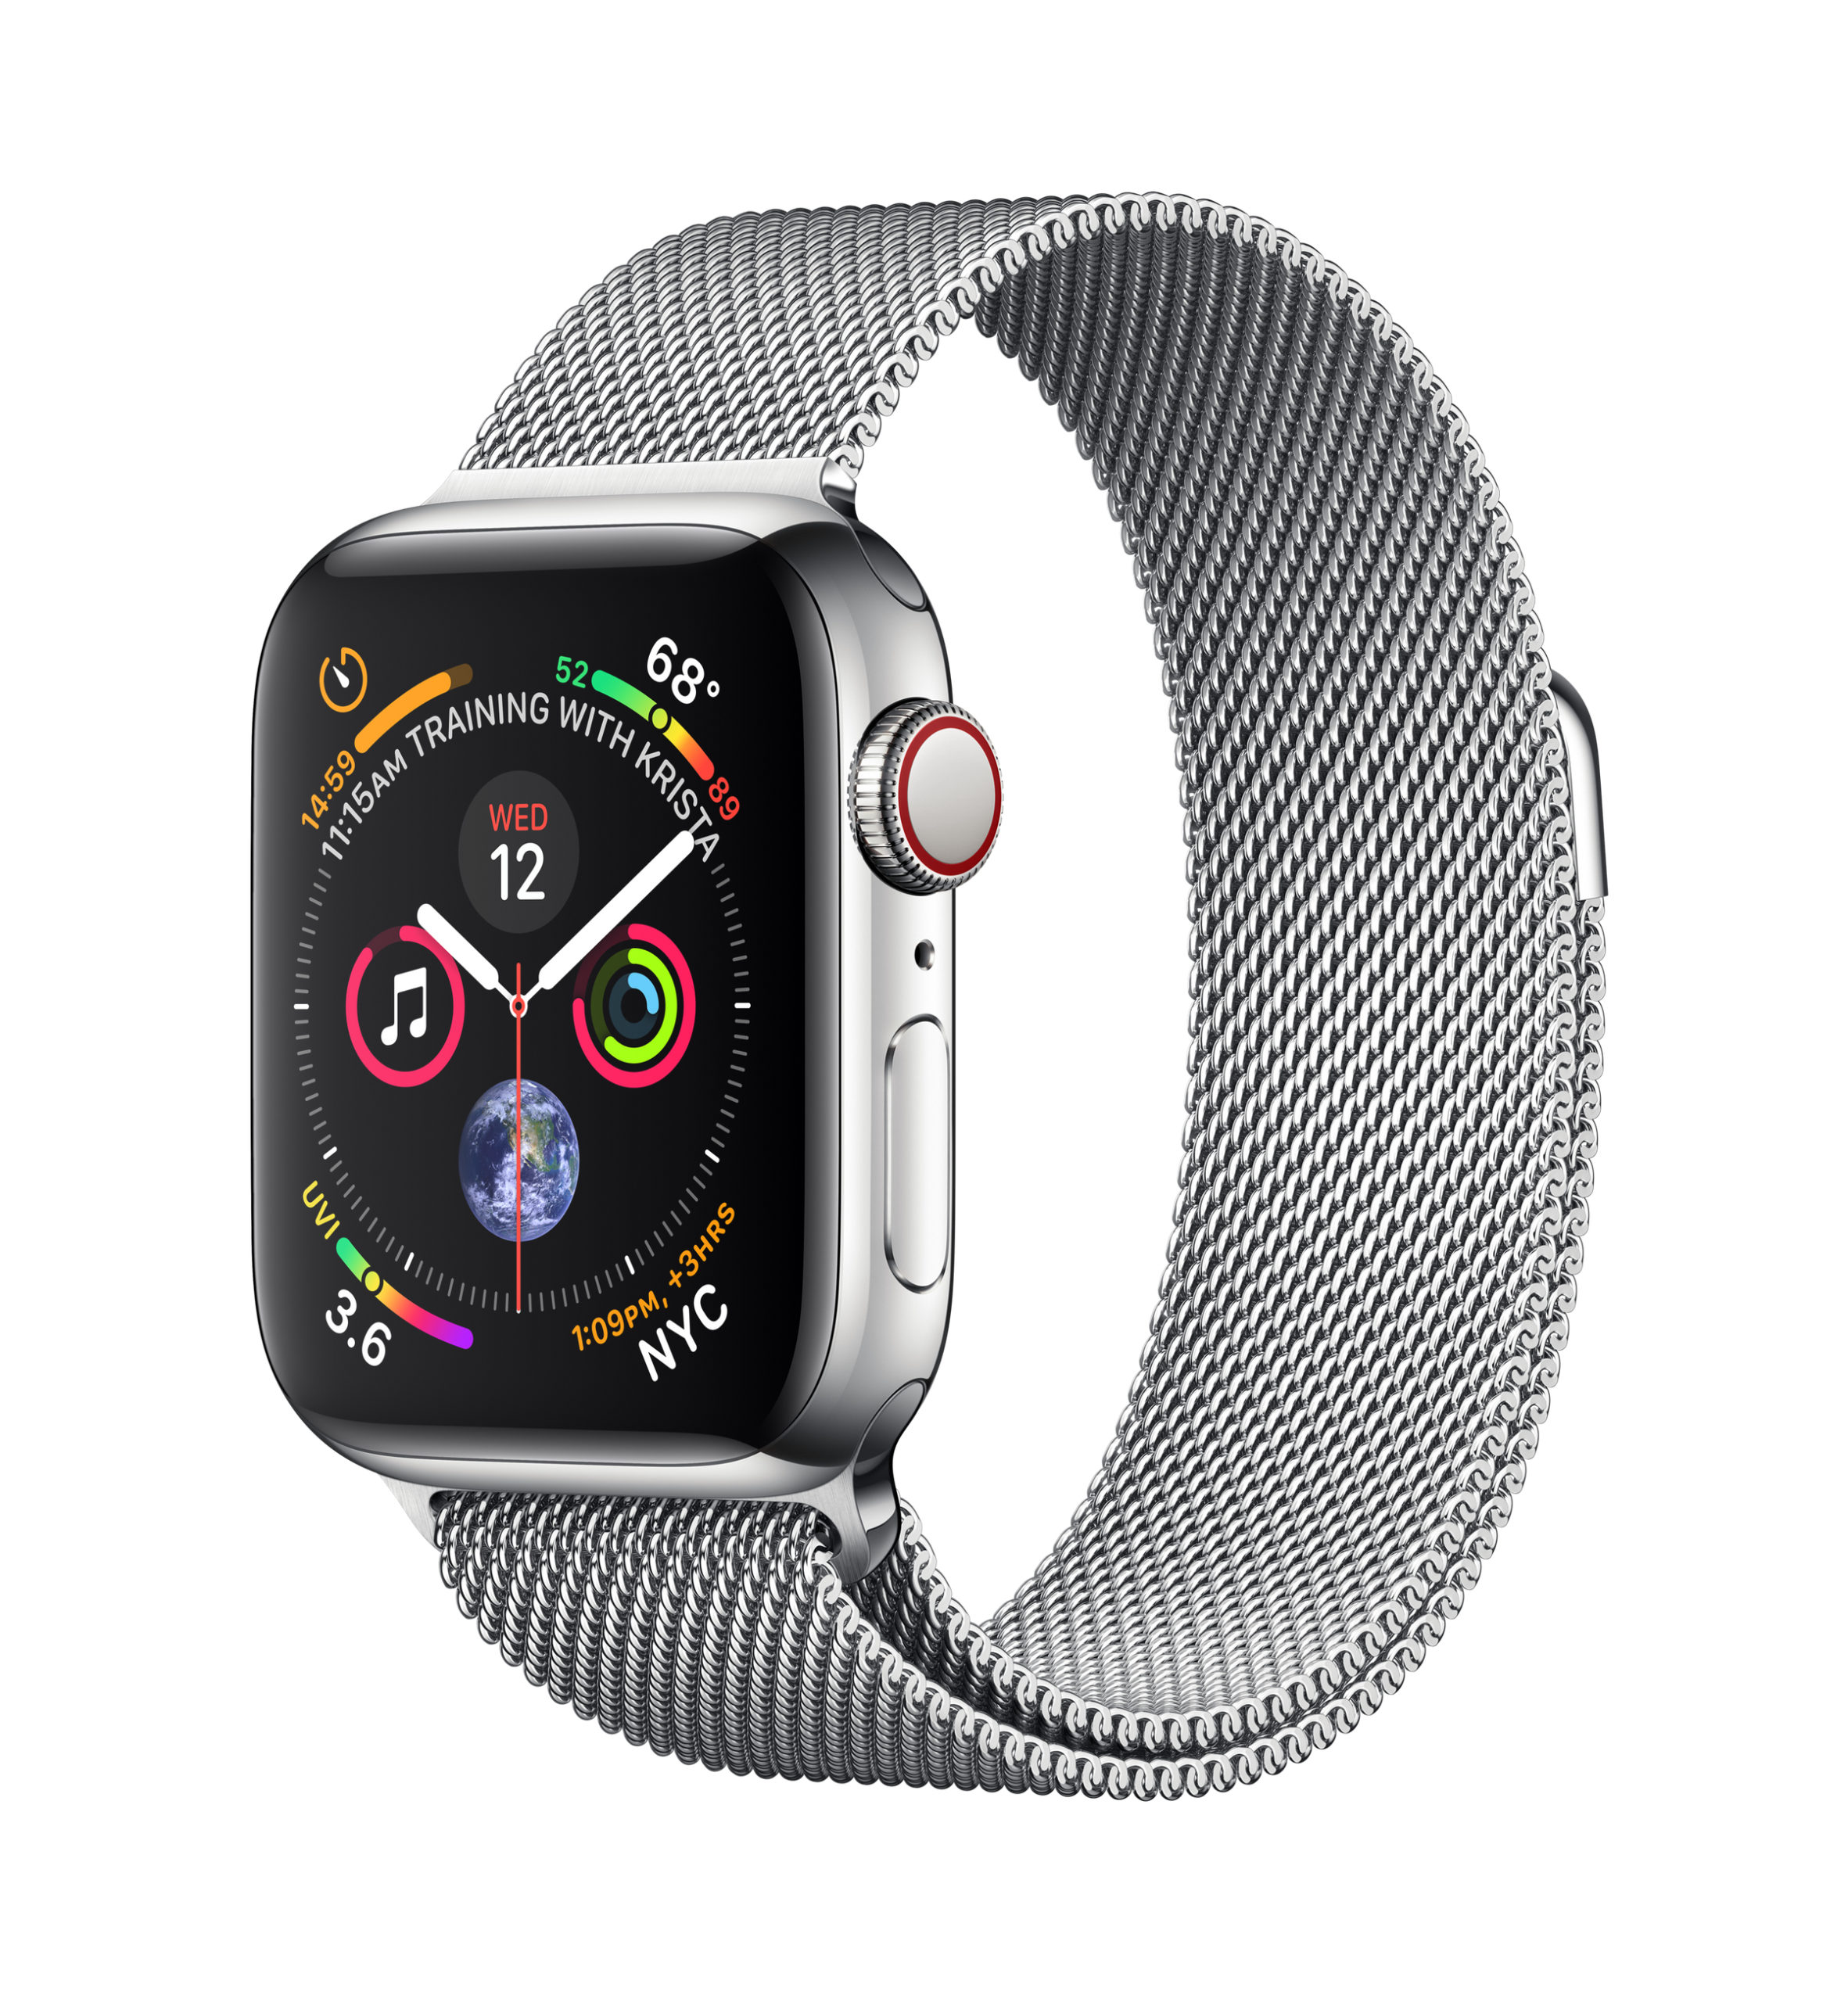 MTUM2LL/A - $347 - Apple Watch Series 4 GPS + Cellular 40mm Stainless